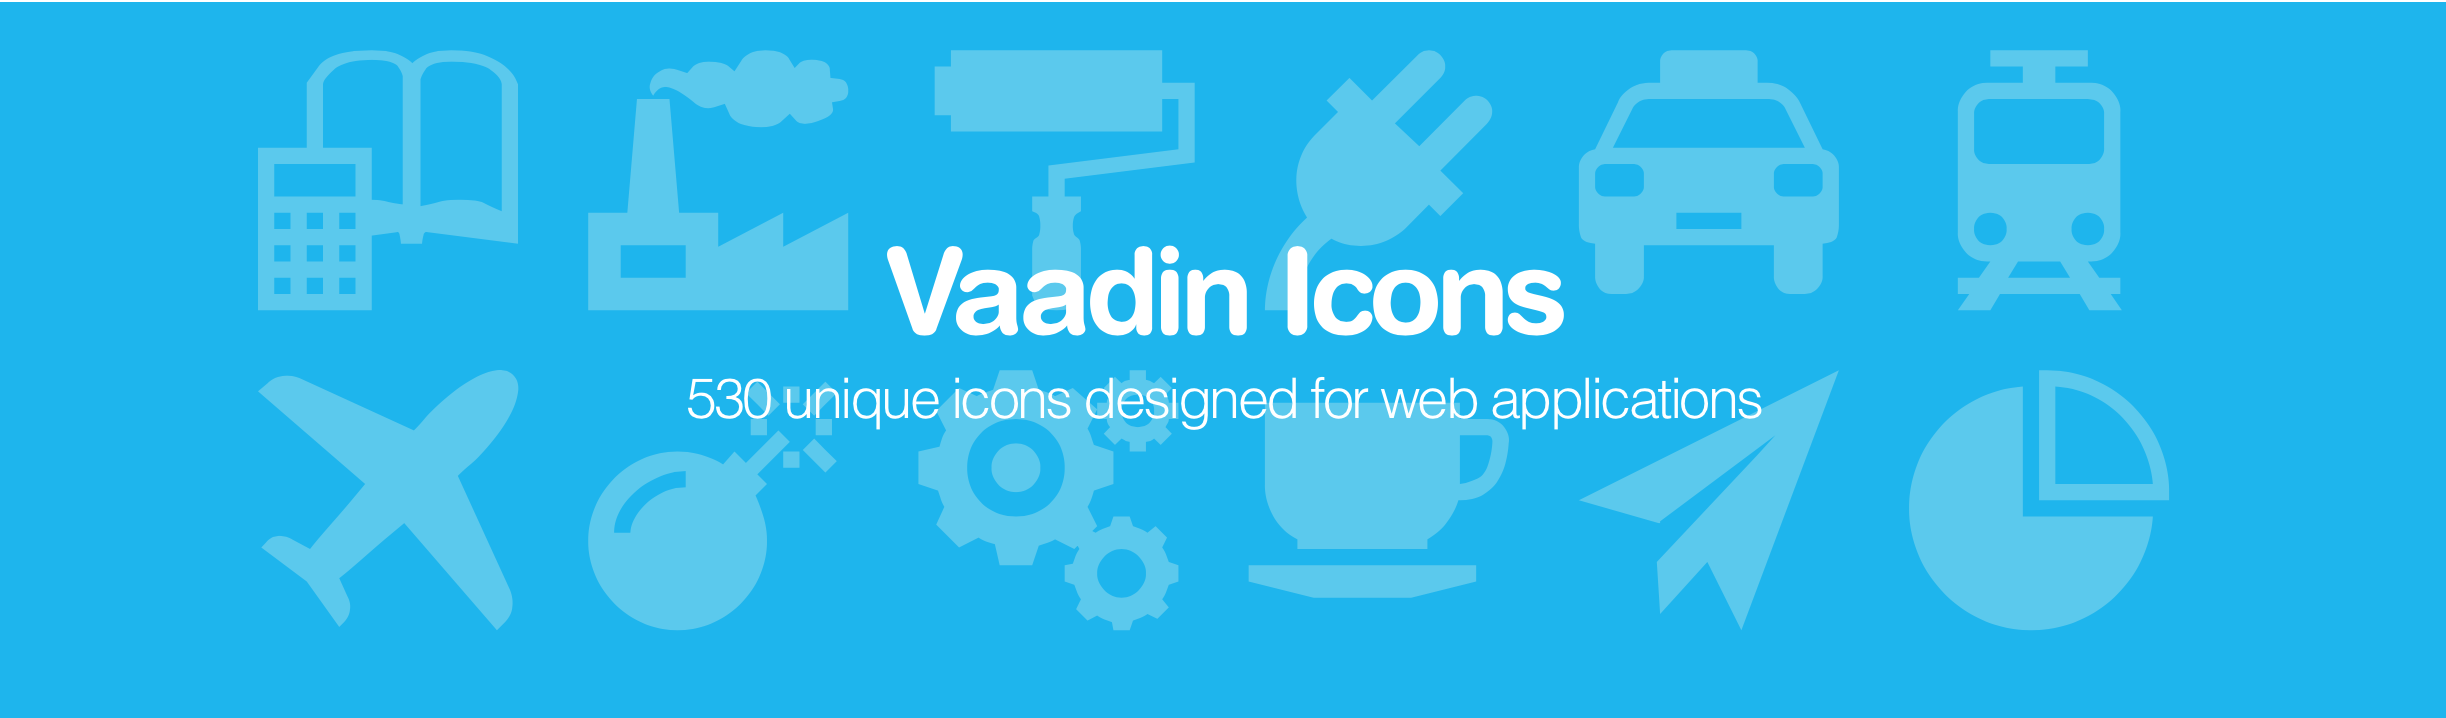 Screenshot of some icons in the Vaadin Icons collection